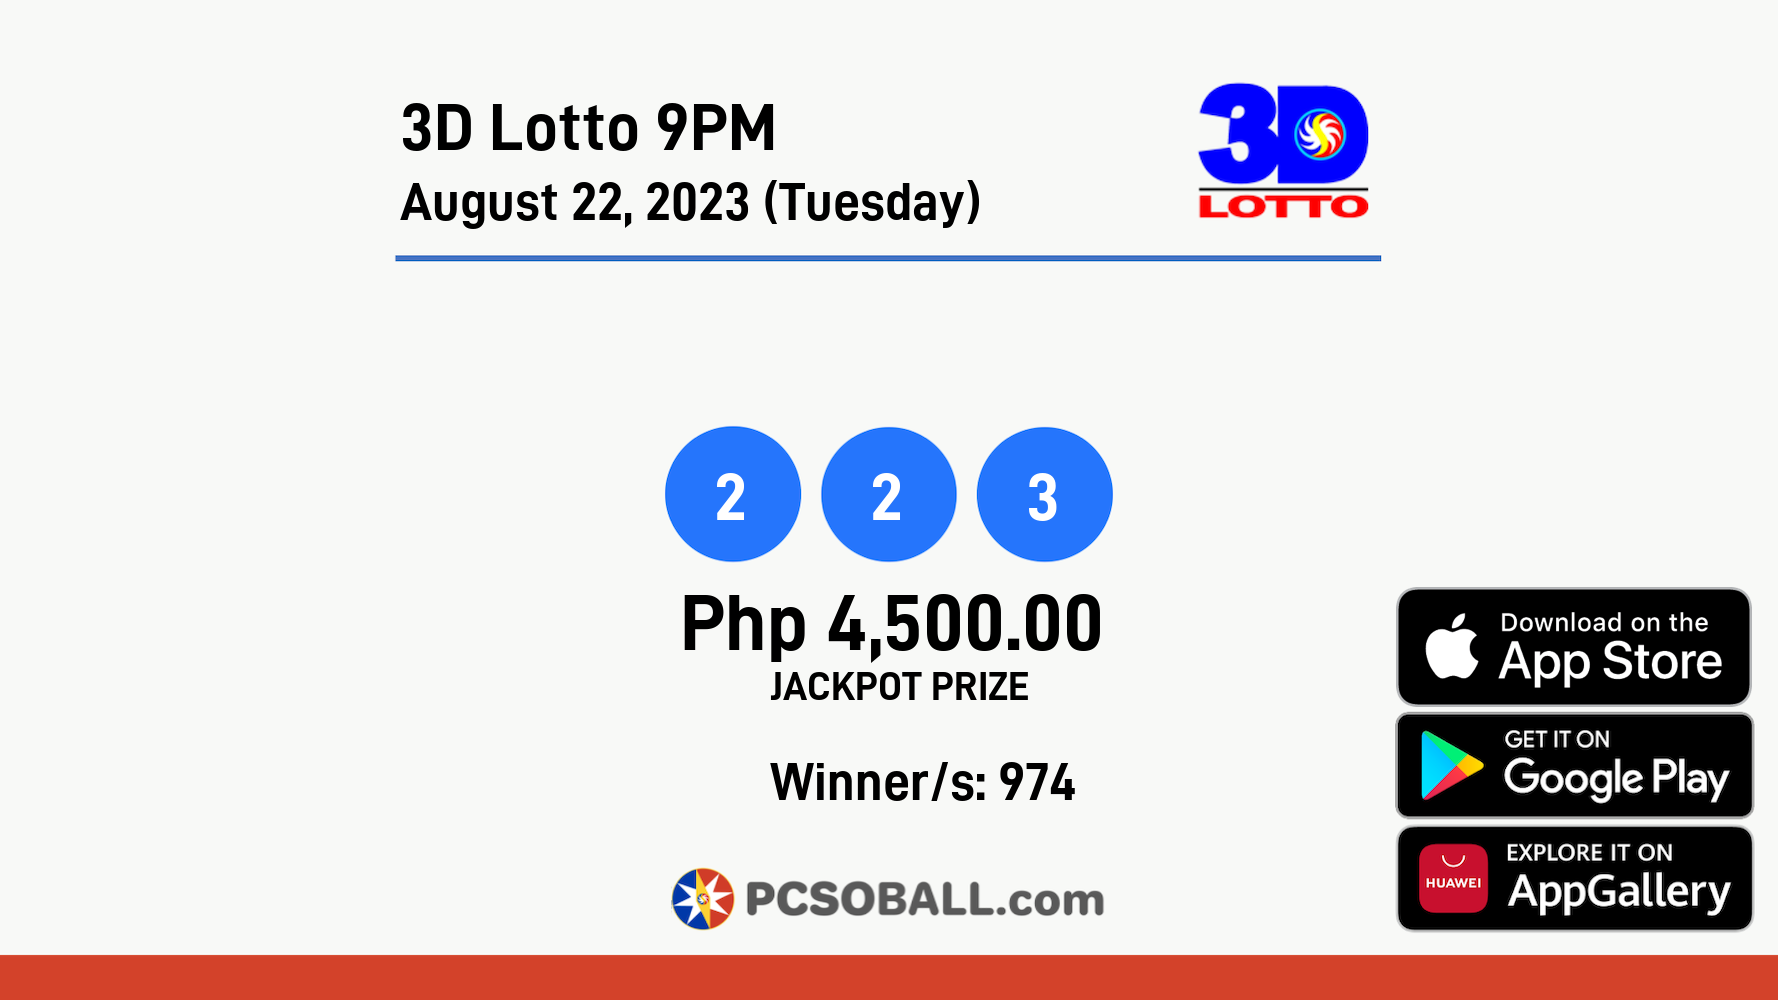 3D Lotto 9PM August 22, 2023 (Tuesday) Result